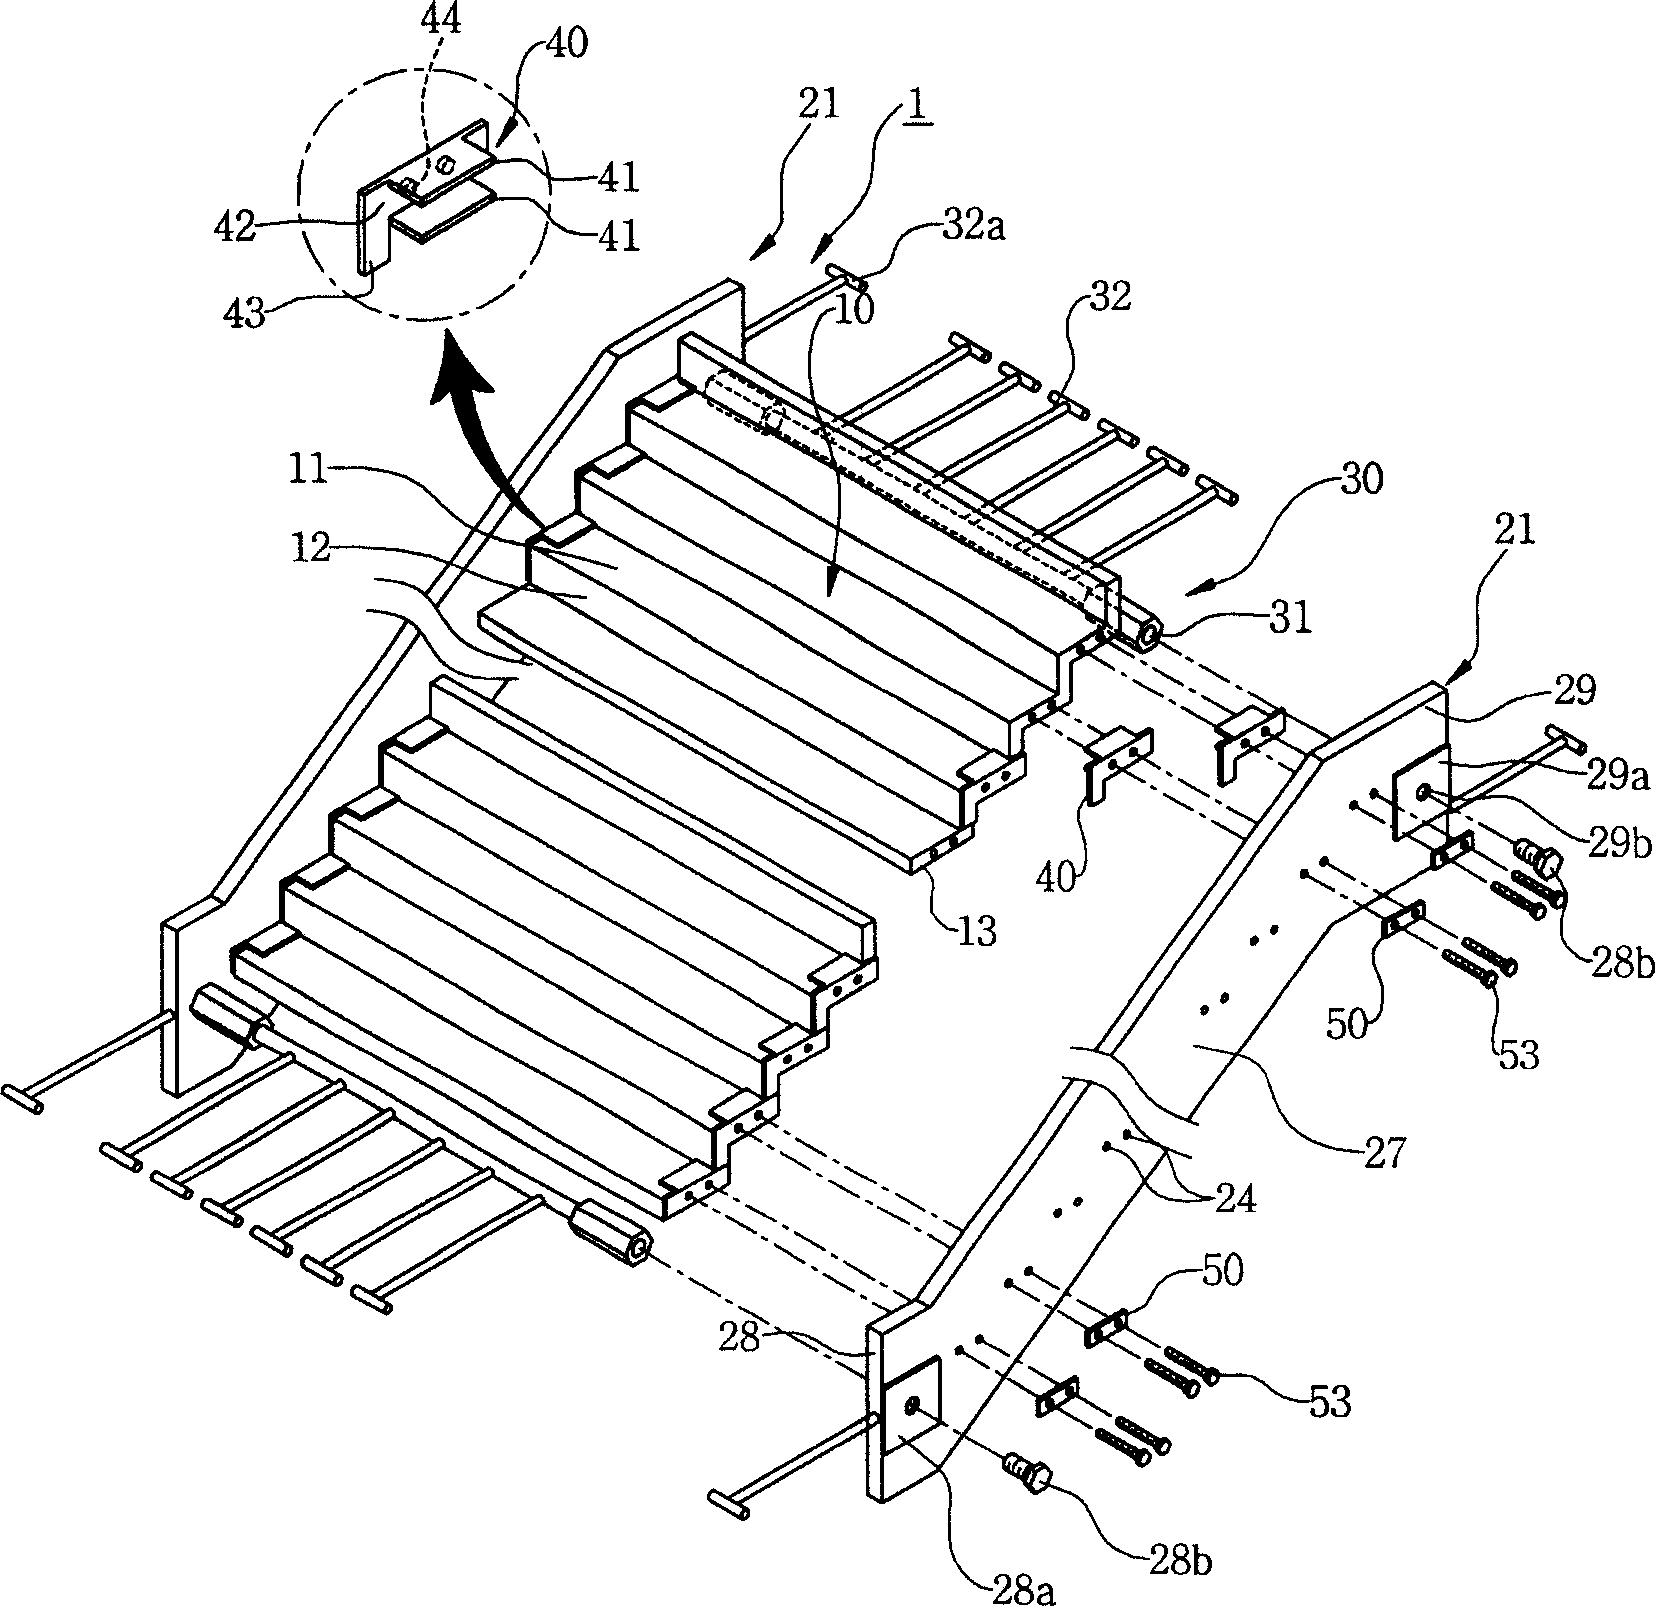 Precast stairway system, unit structure thereof, and method of constructing stairway system using the same